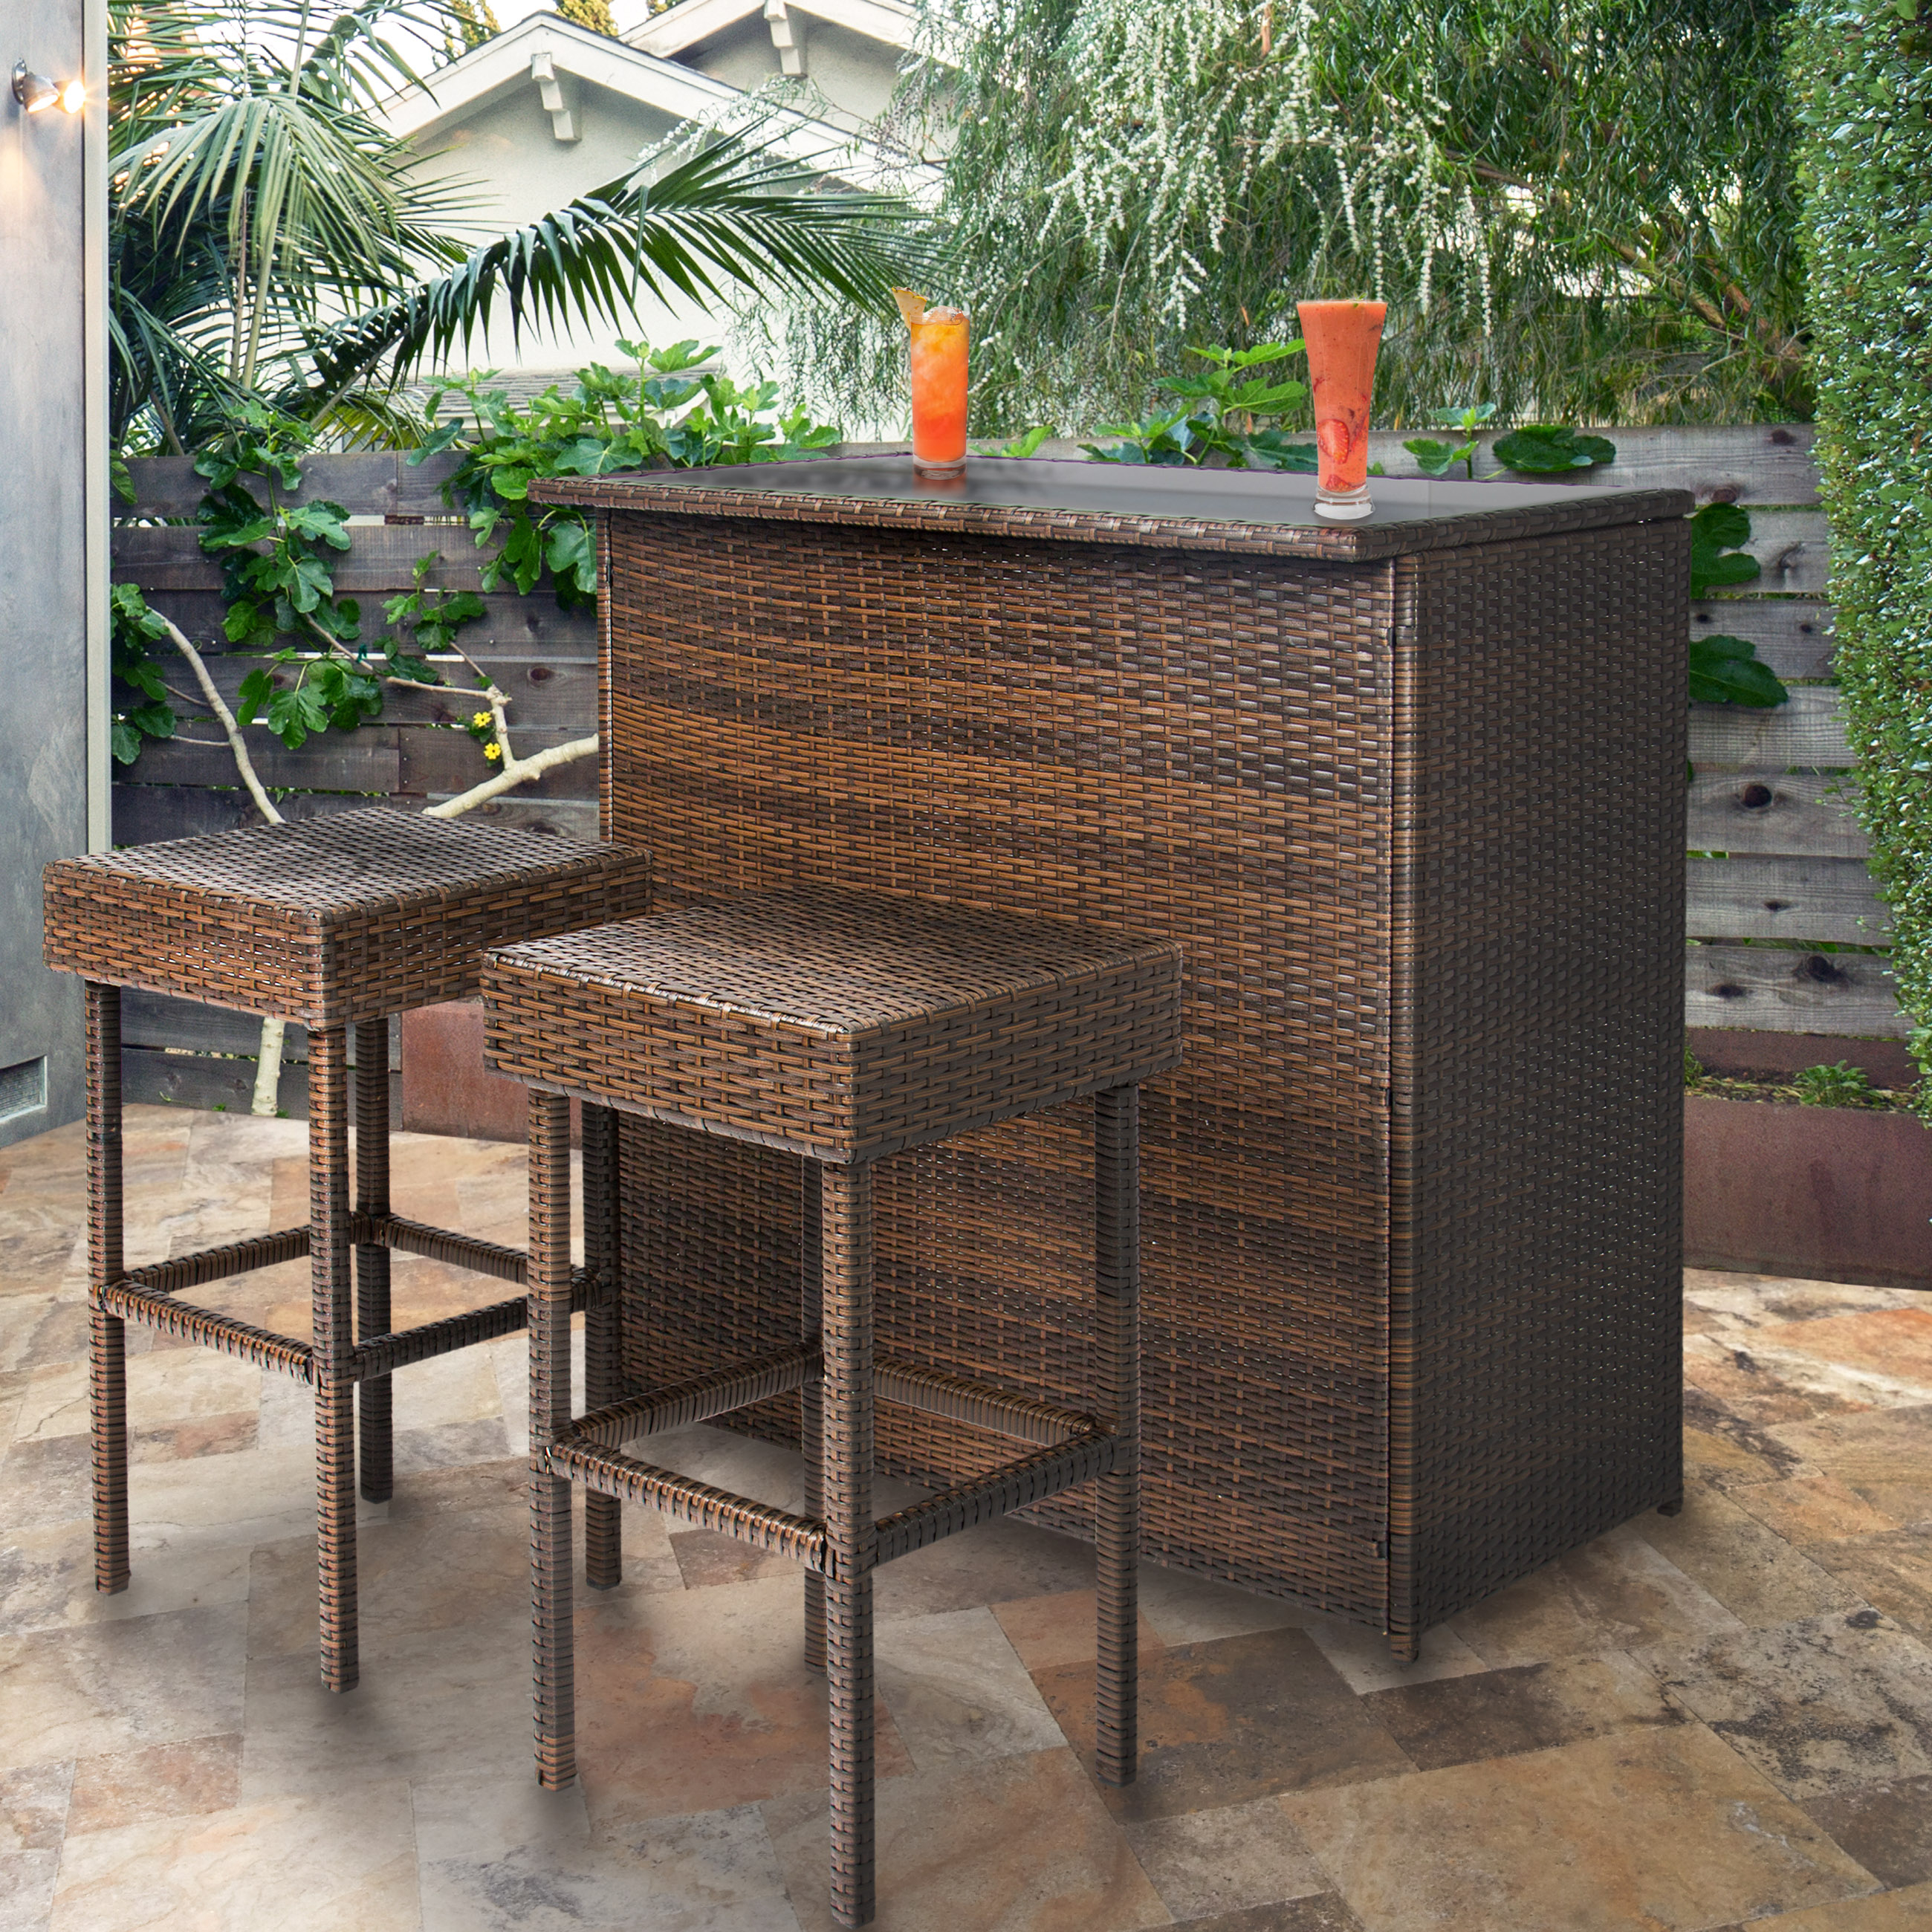 Best Choice Products Wicker 3 Piece Outdoor Bar Set Walmart with sizing 2600 X 2600